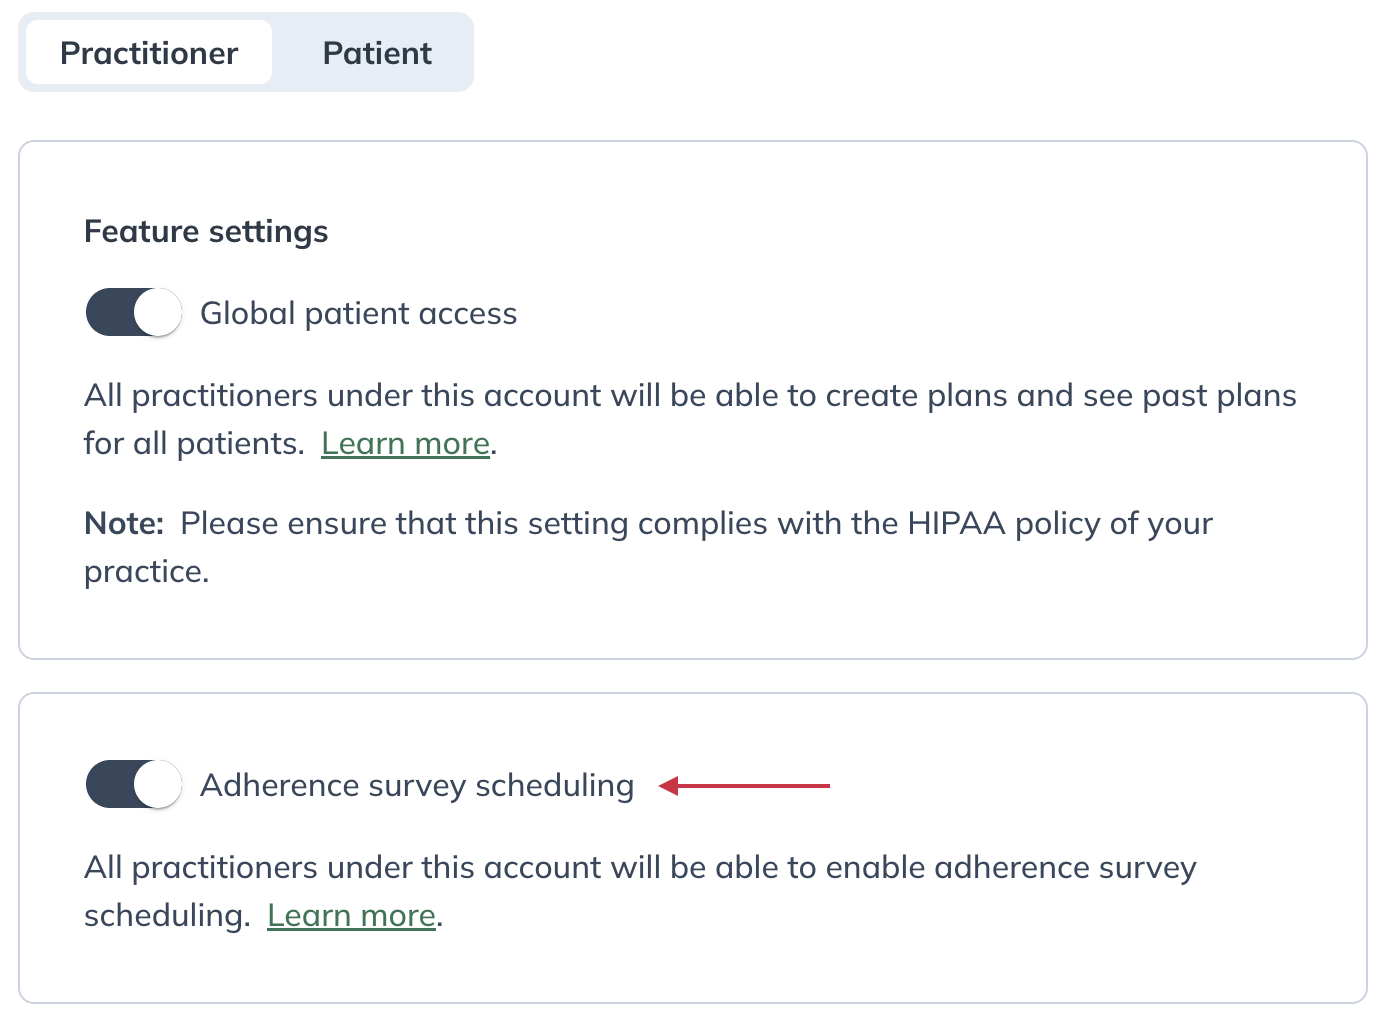 disable surveys from feature settings